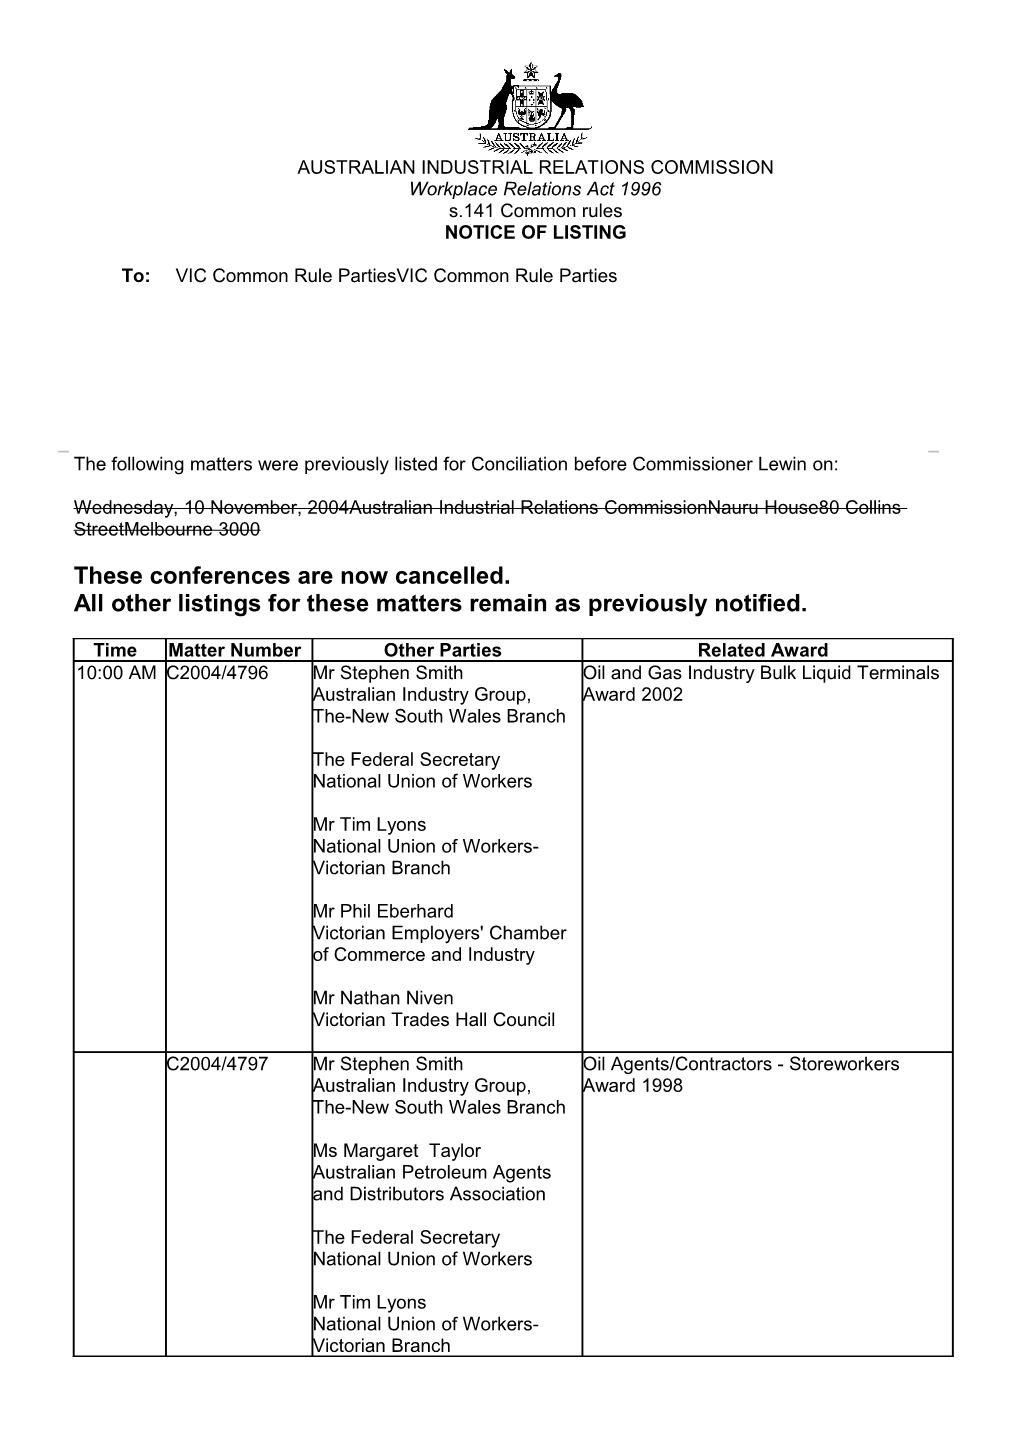 The Following Matters Were Previously Listed for Conciliation Before Commissioner Lewin On